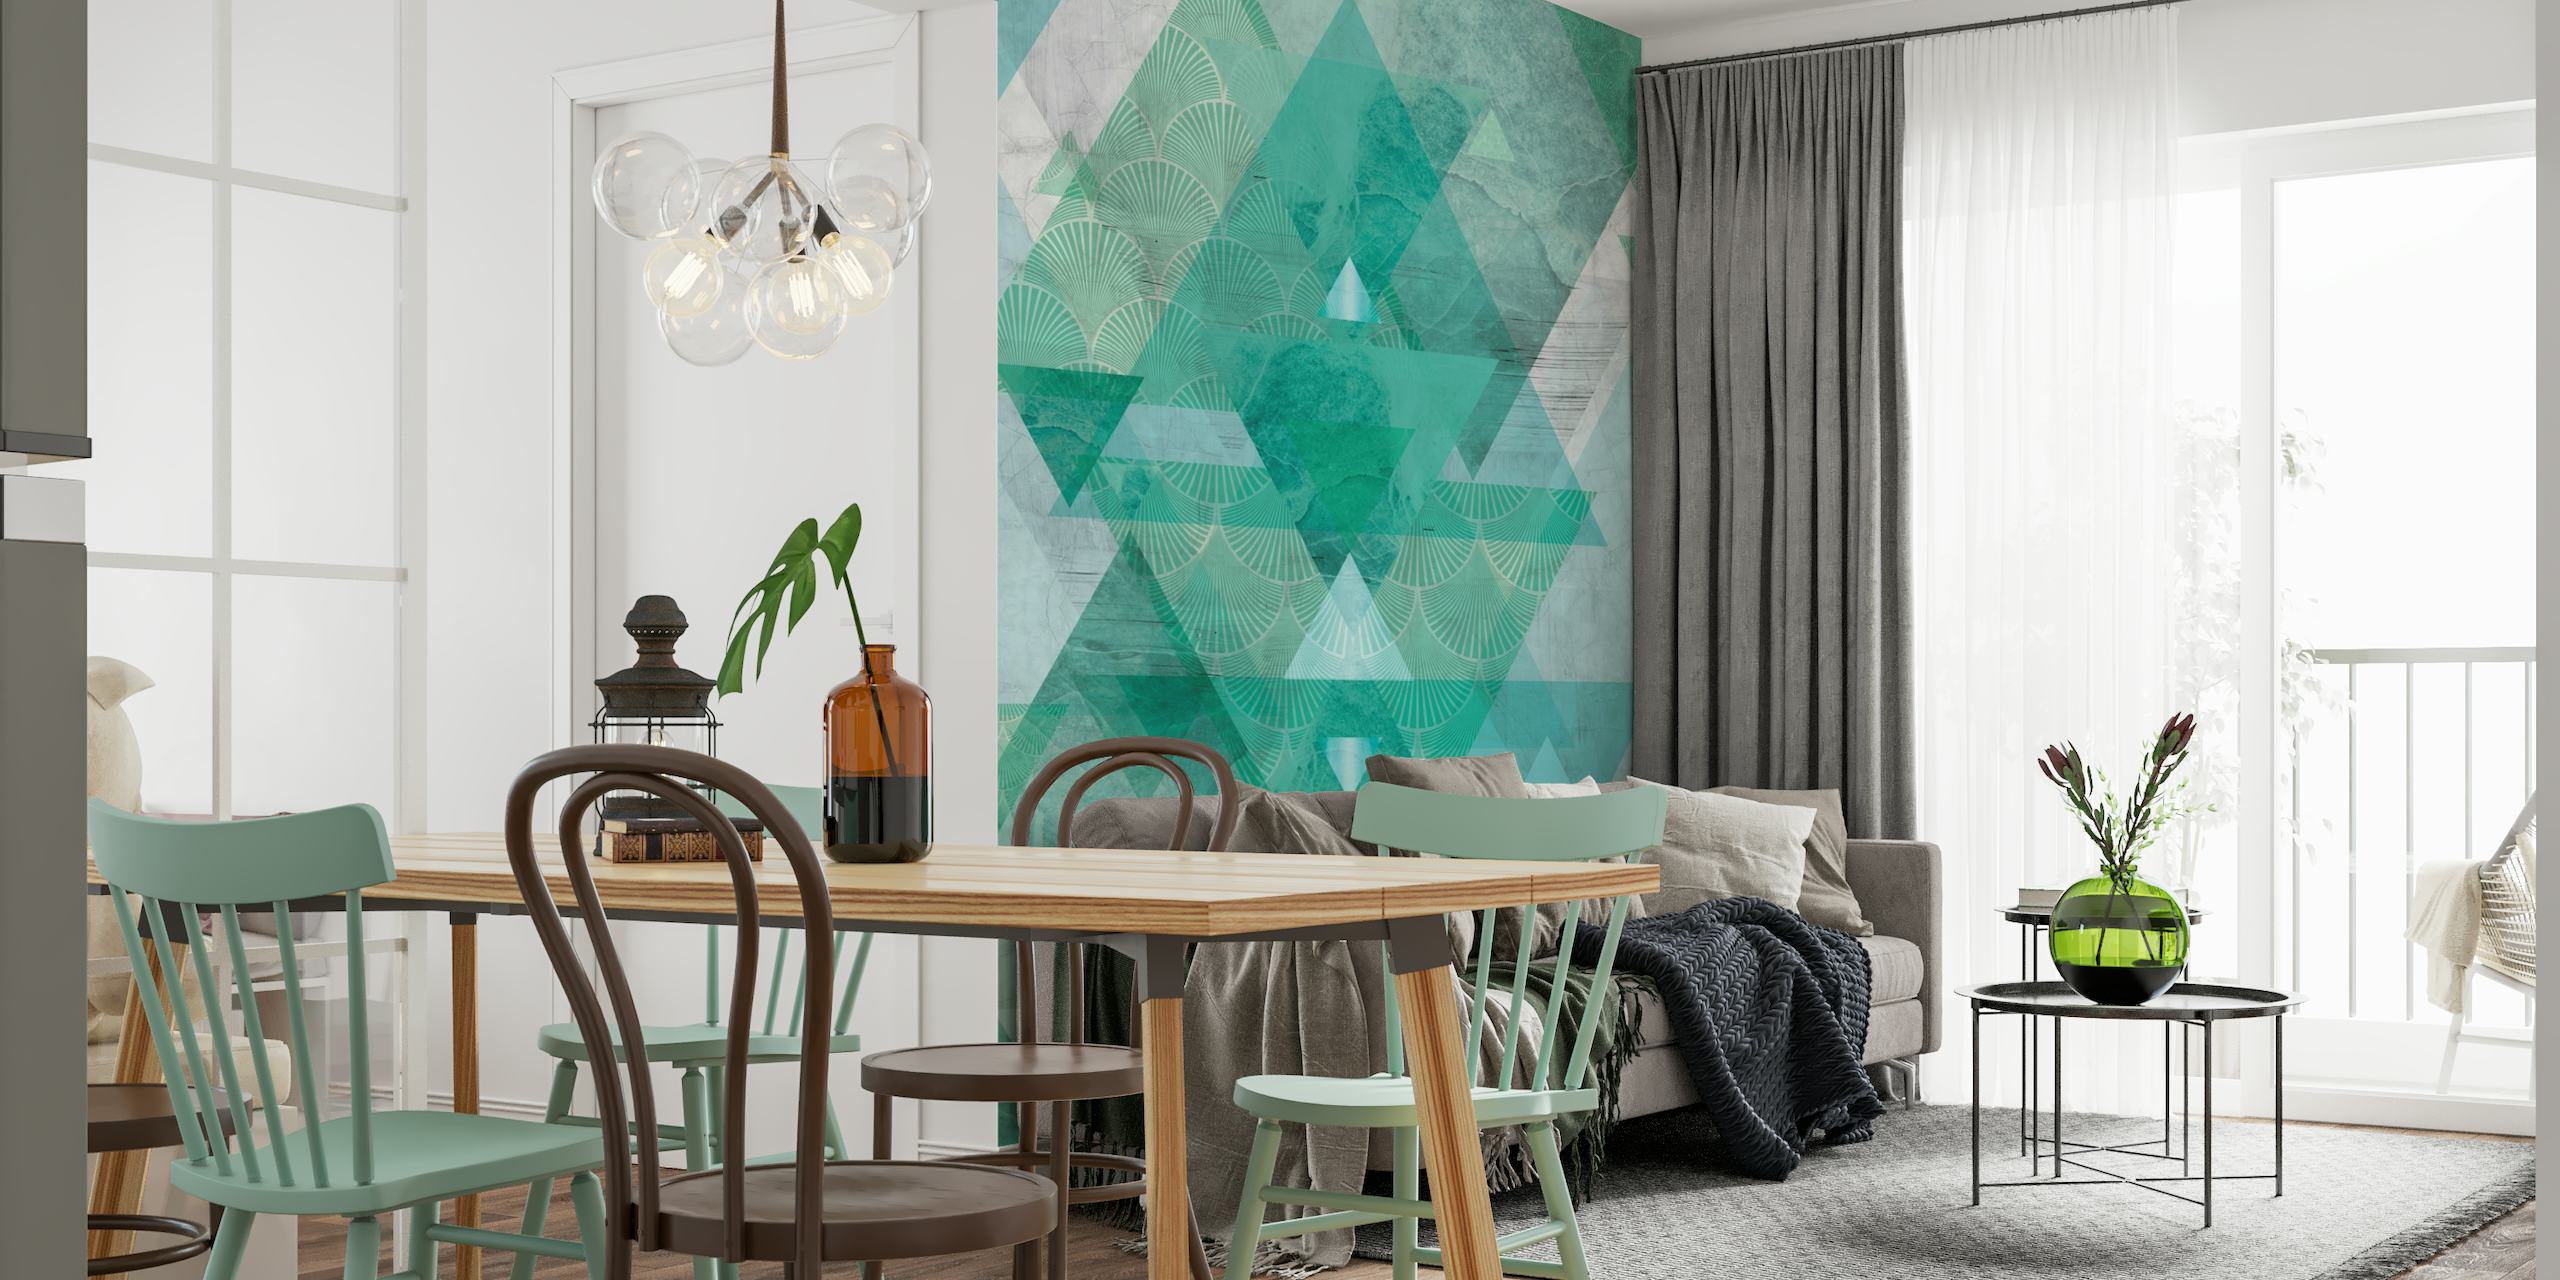 Aqua Teal Geometric wall mural with layered triangles and textured appearance